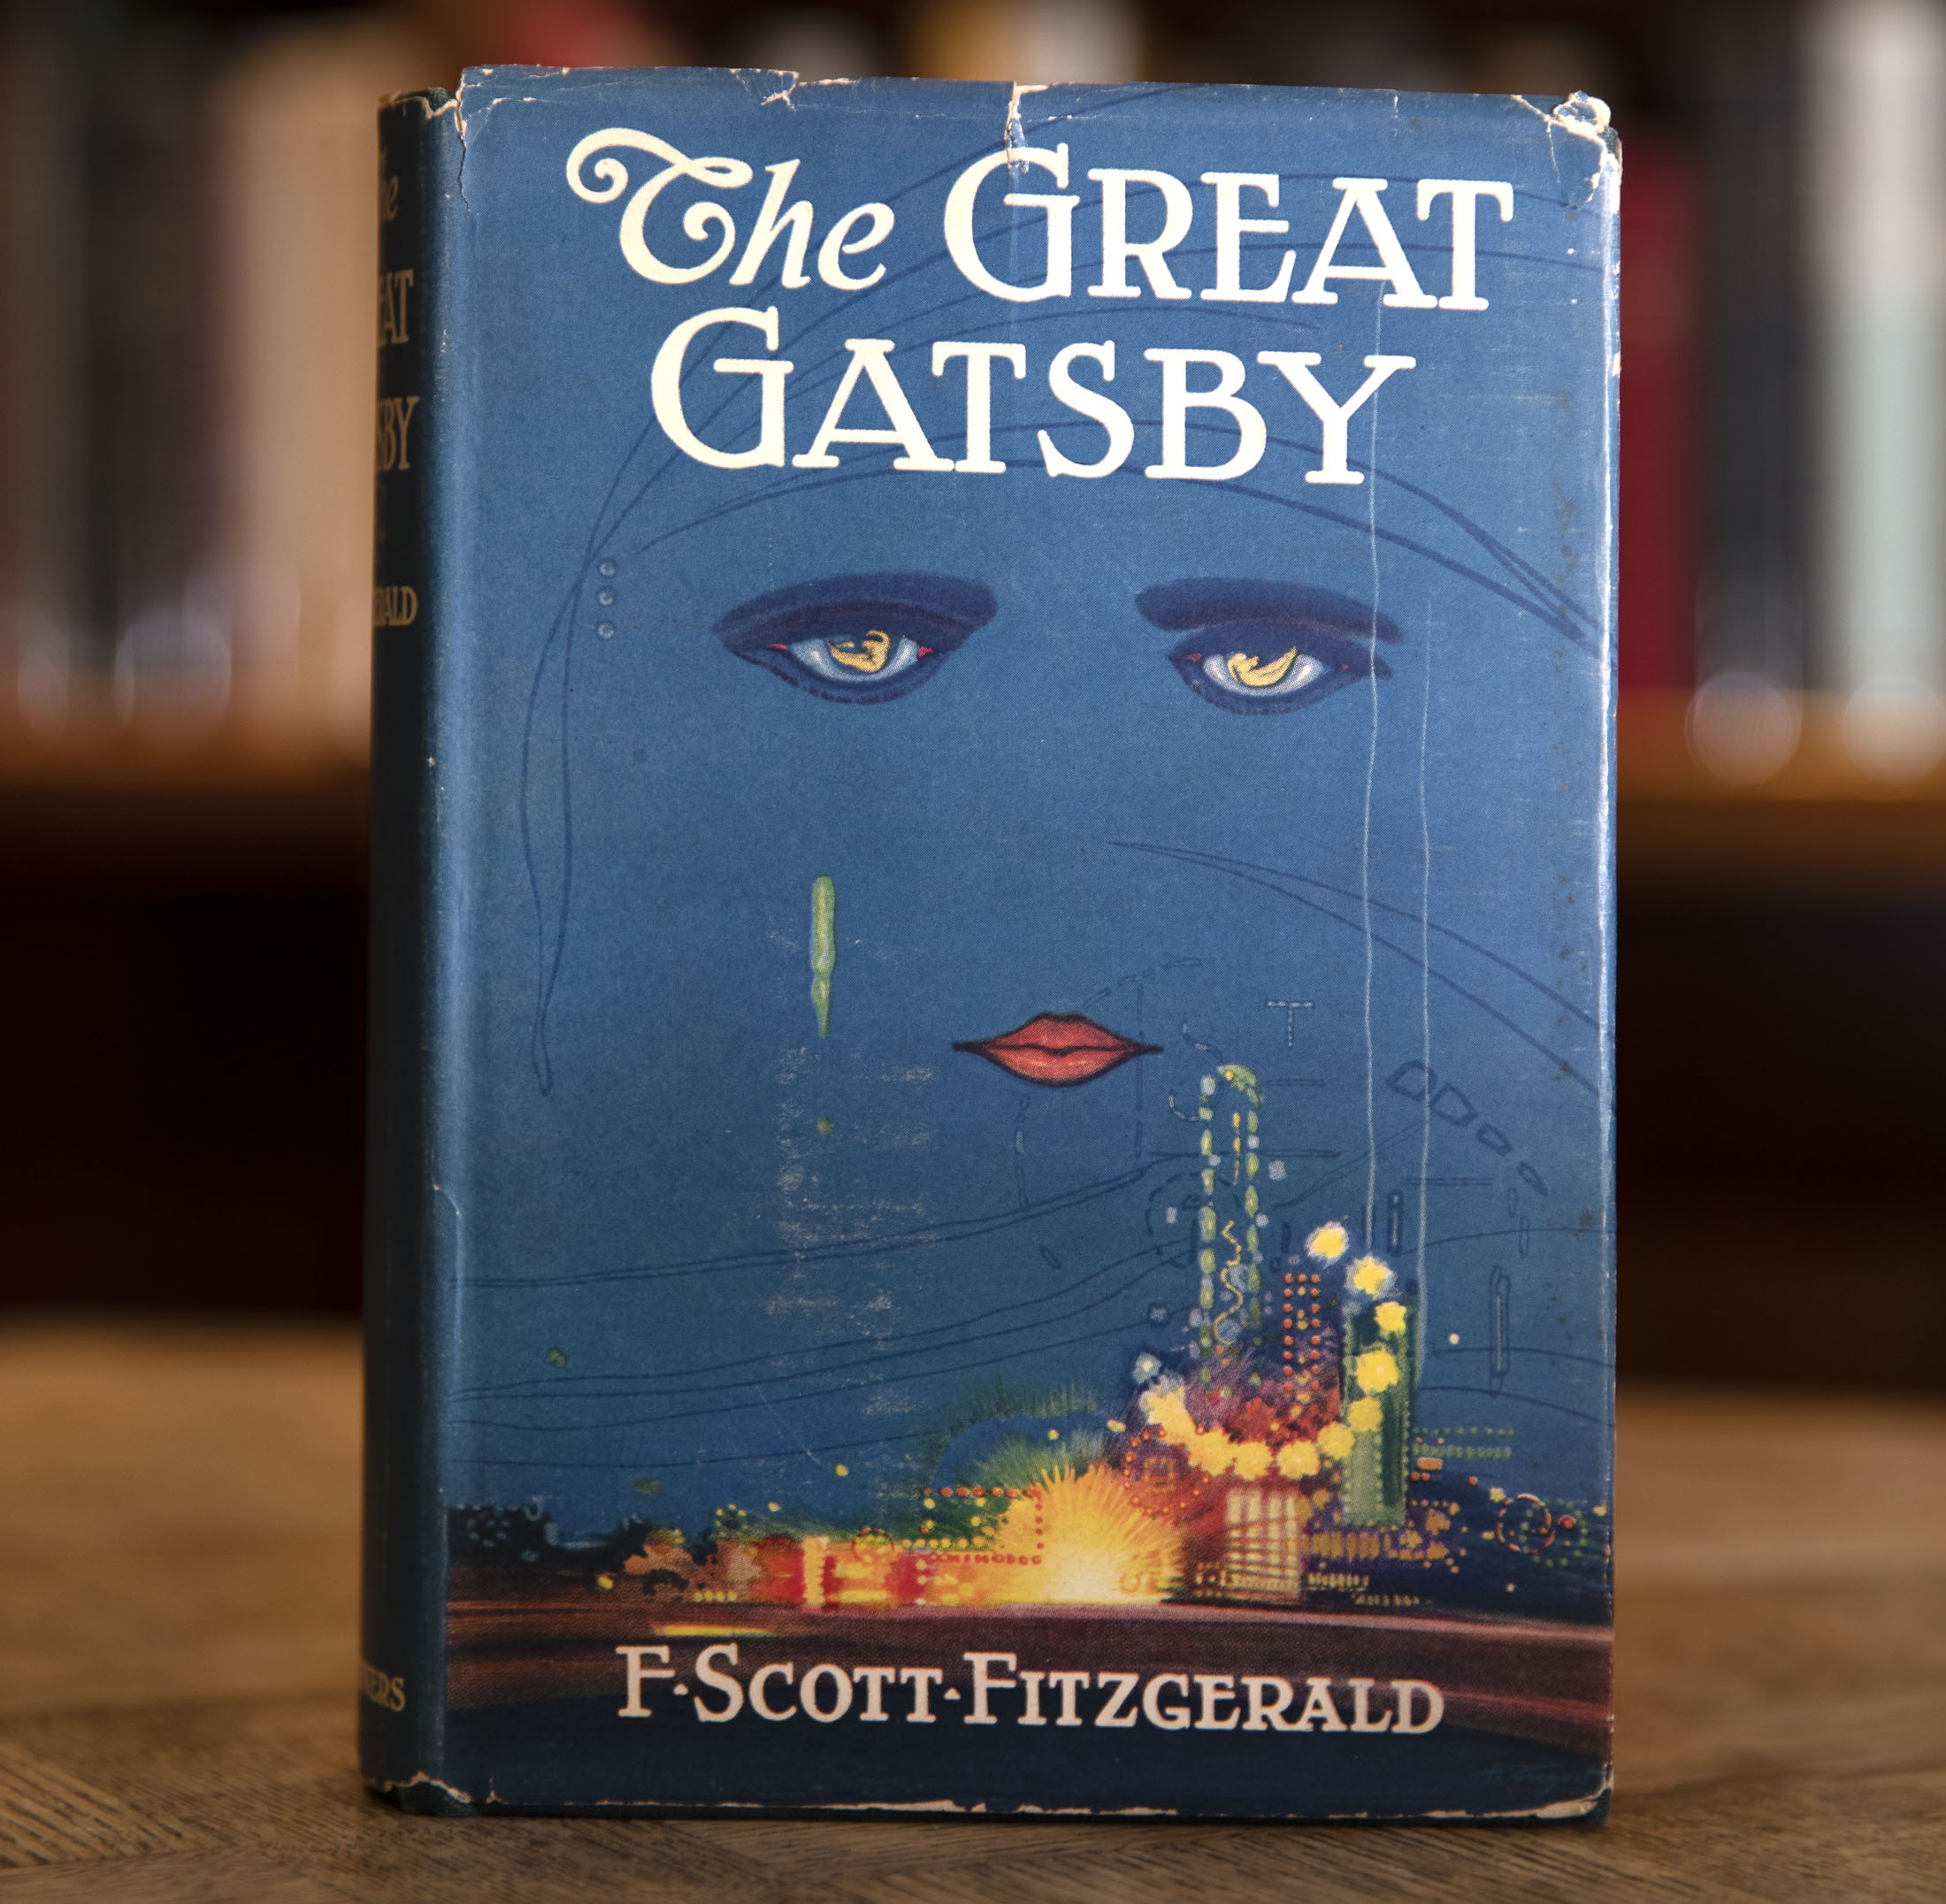 Five reasons 'Gatsby' is the great American novel